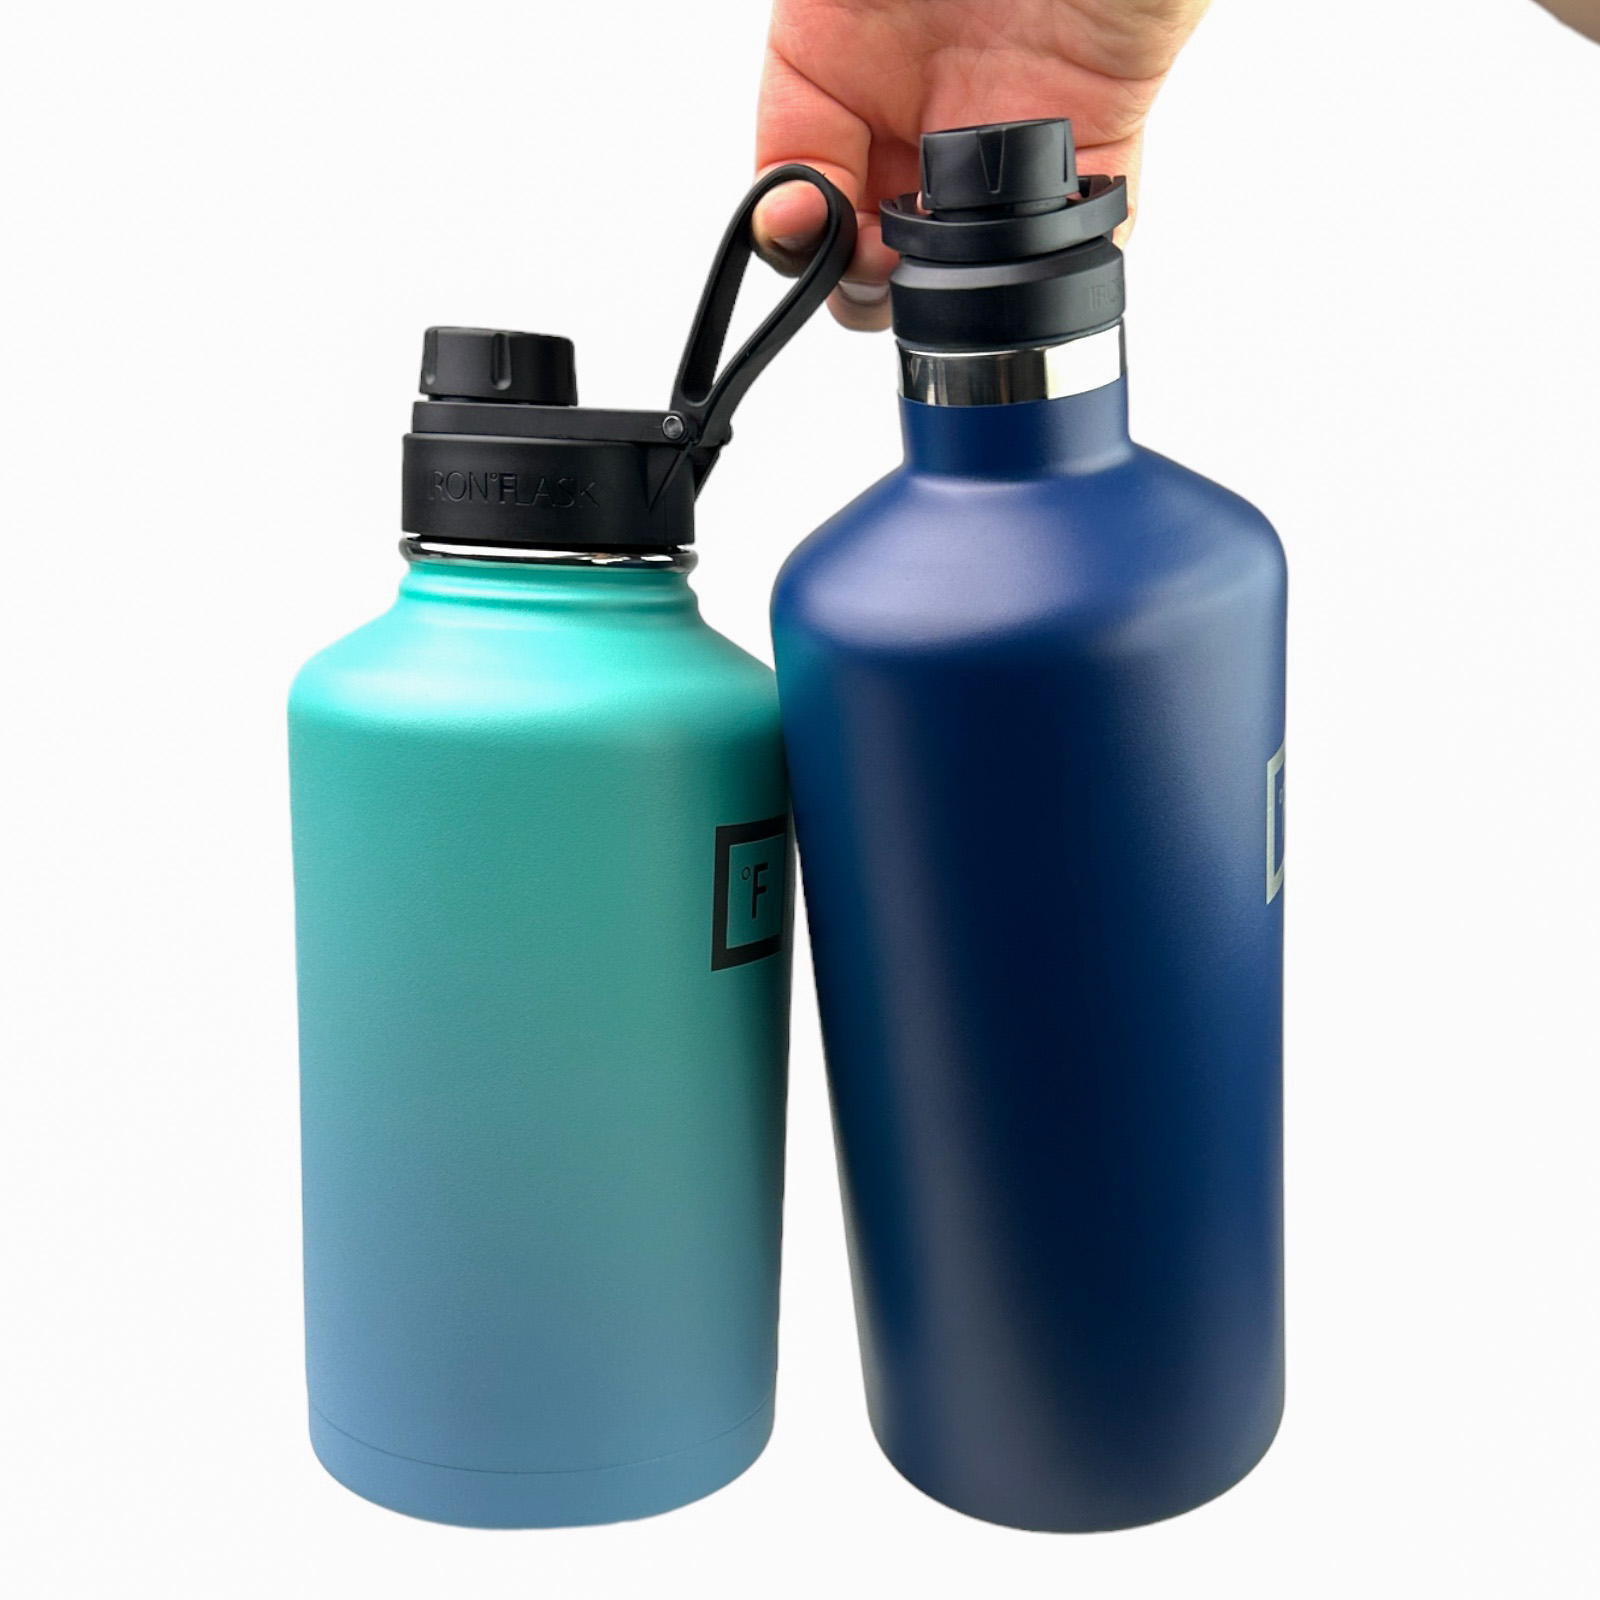 Iron Flask 64oz Double Walled Stainless Steel Vacuum Insulated Water Bottle with THREE Style Lids $19.99 (reg $45)